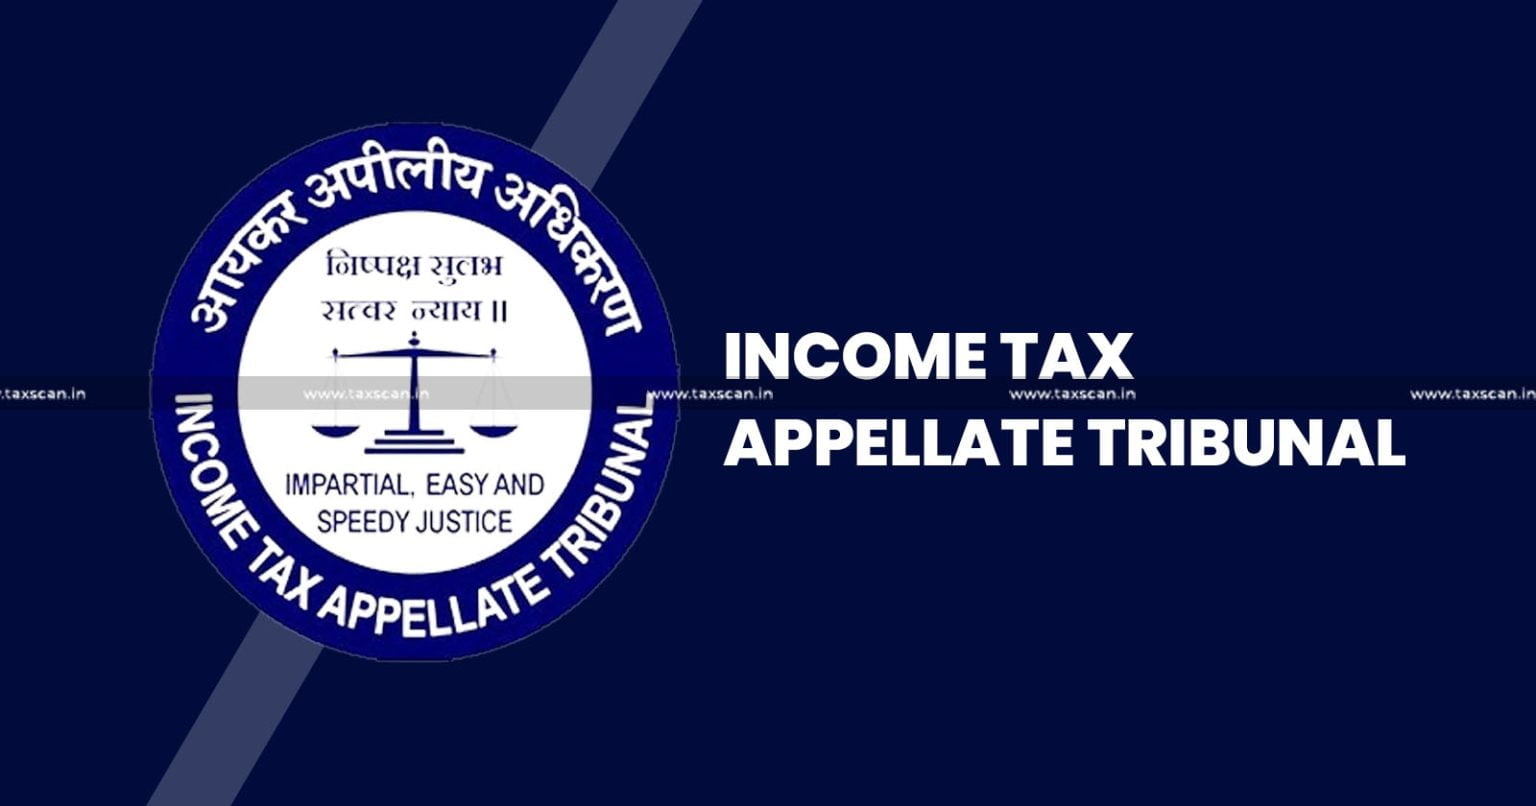 Mere - Non - production - Evidence - Creditor - Assessee - result - Addition - Income - ITAT - Appeal - TAXSCAN